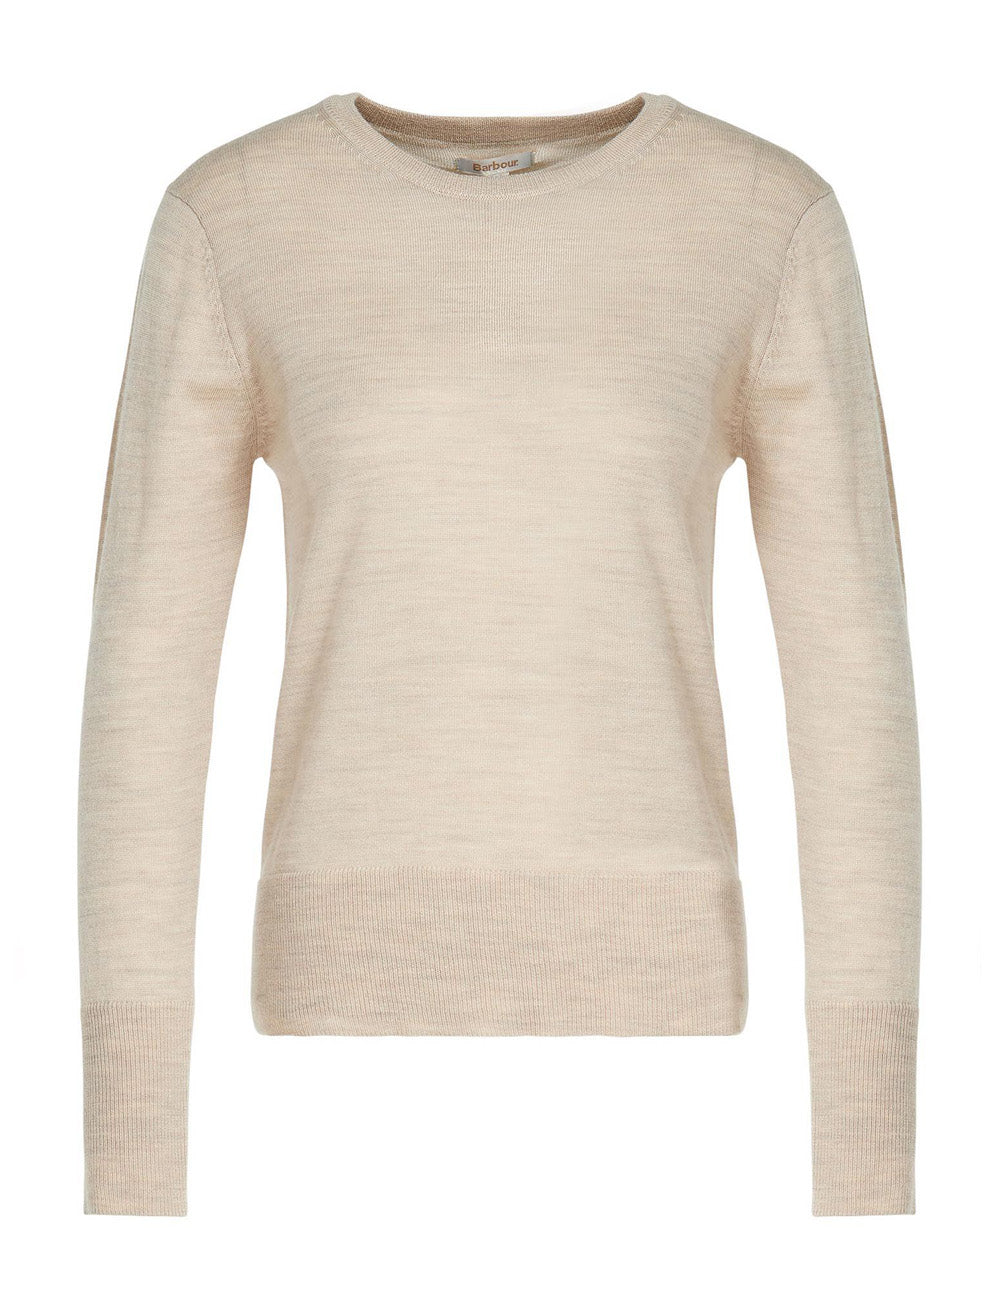 Barbour Ridley Knitted Jumper - Oatmeal